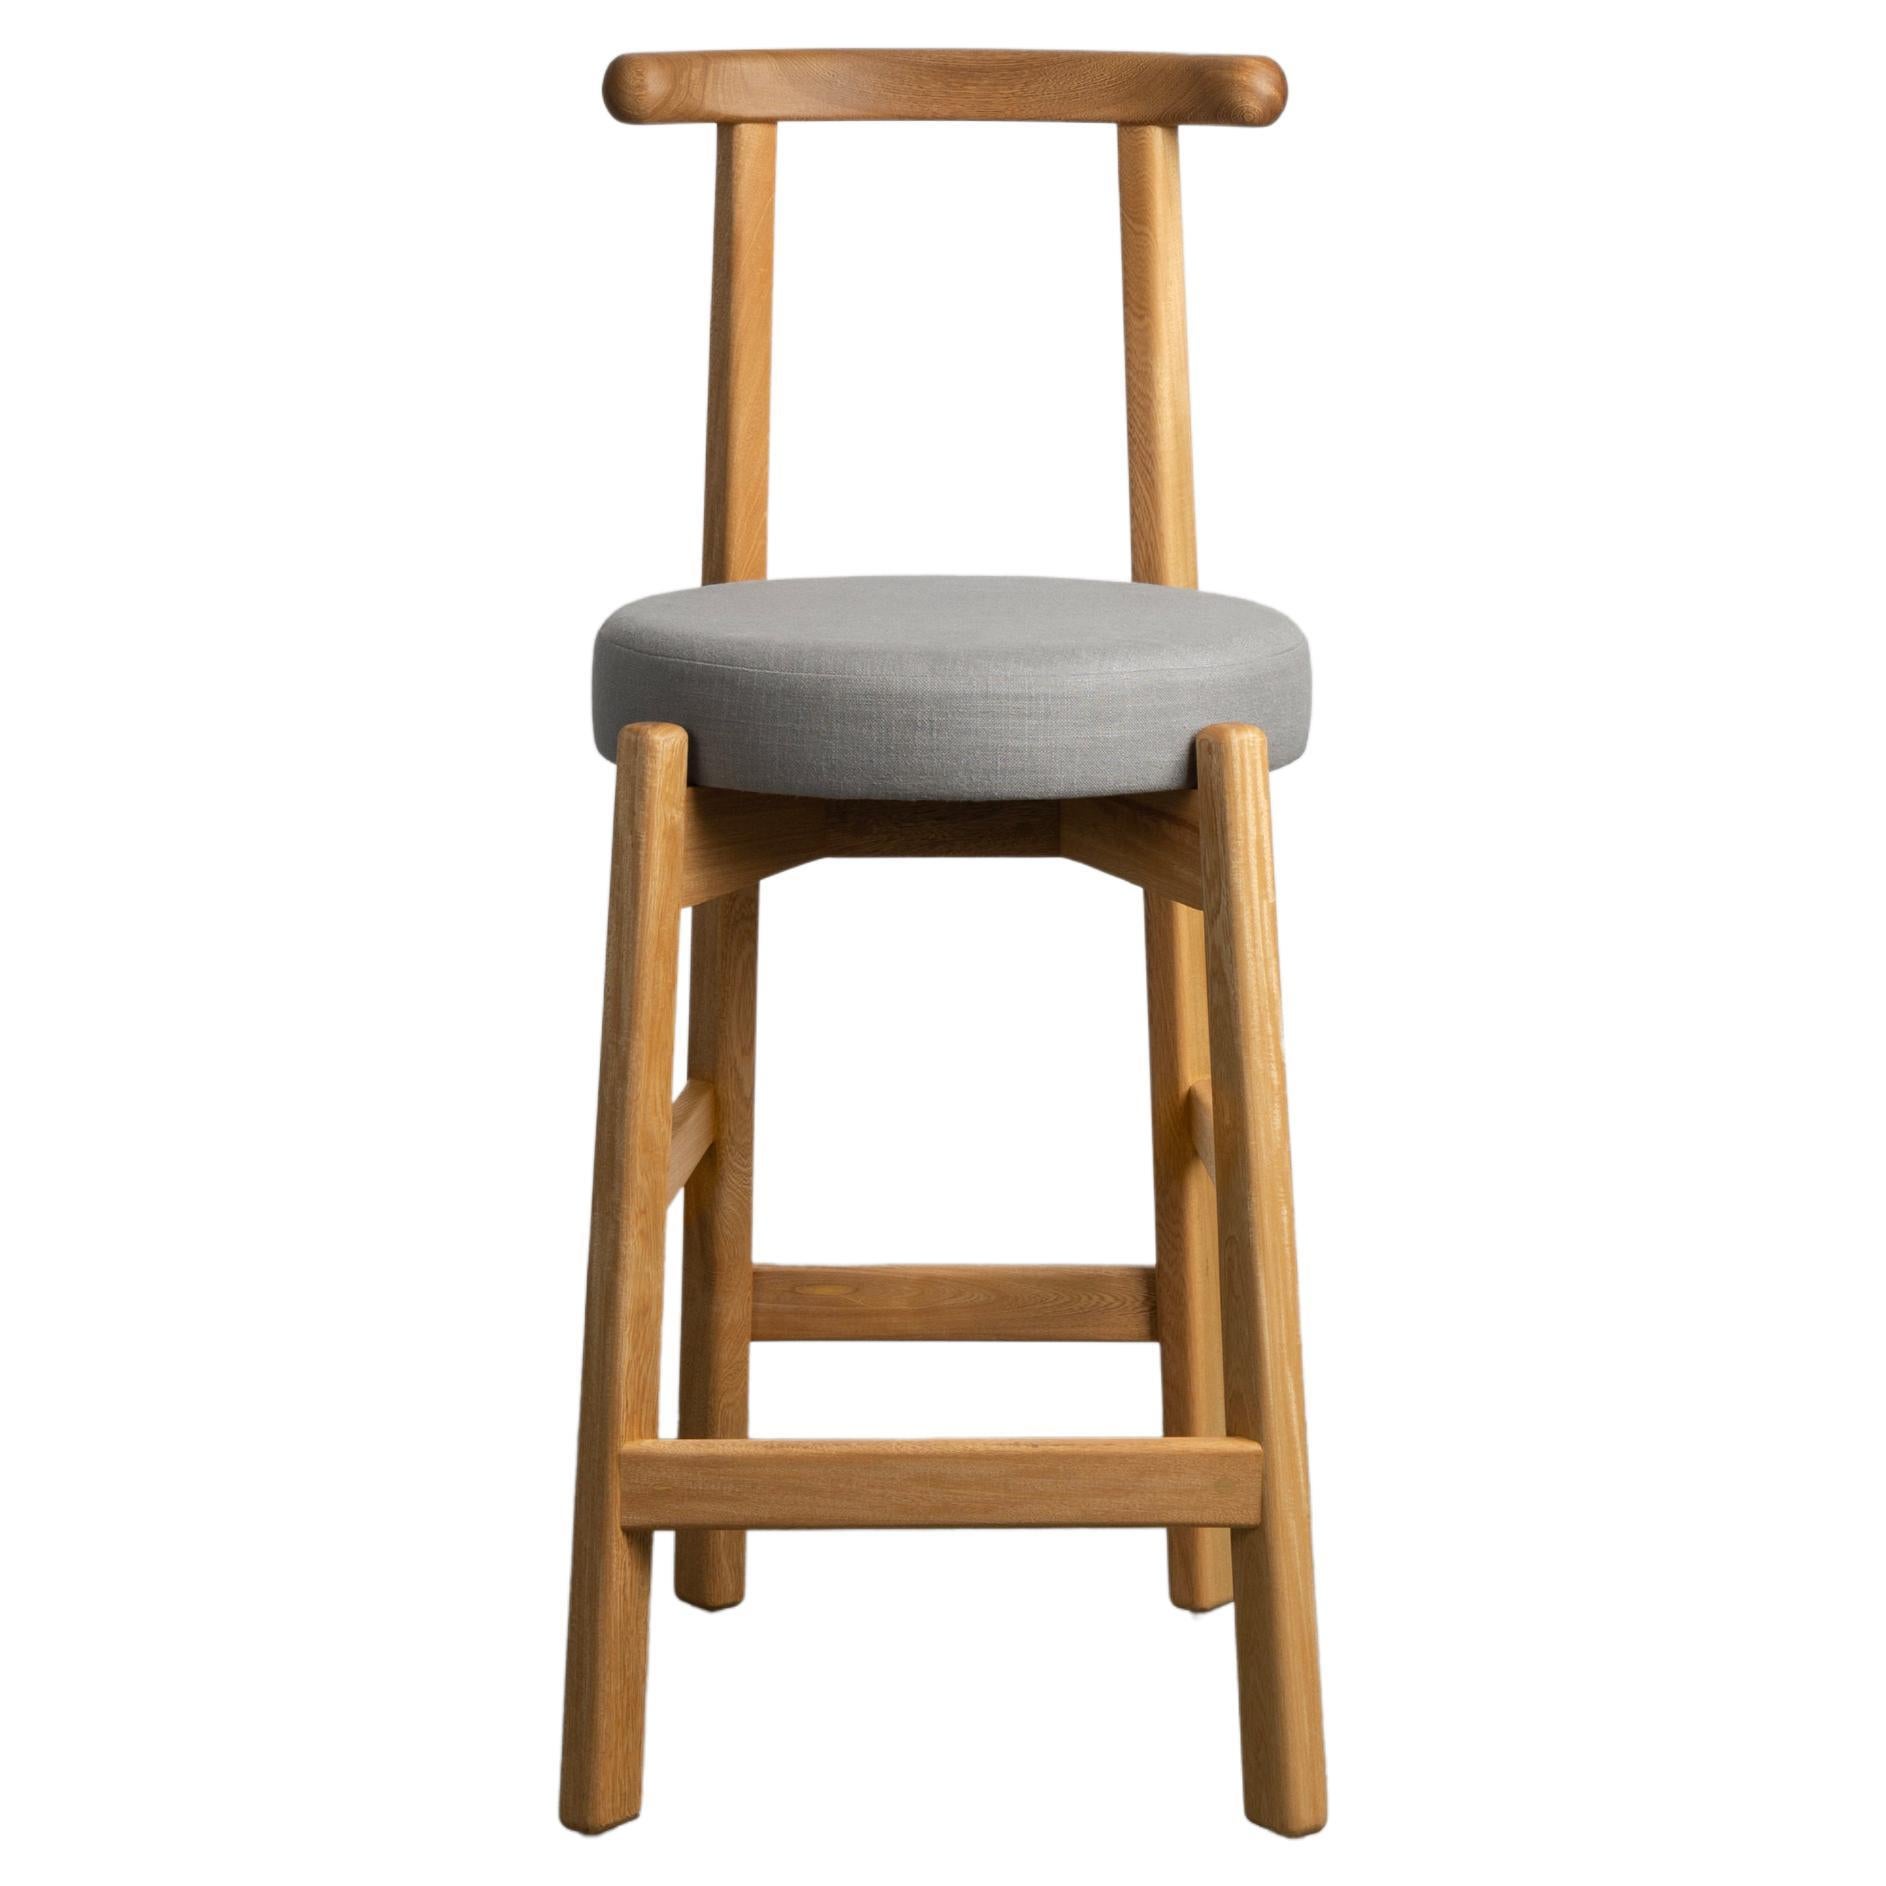 Colima Bar Stool, Modern Contemporary Mexican Design For Sale